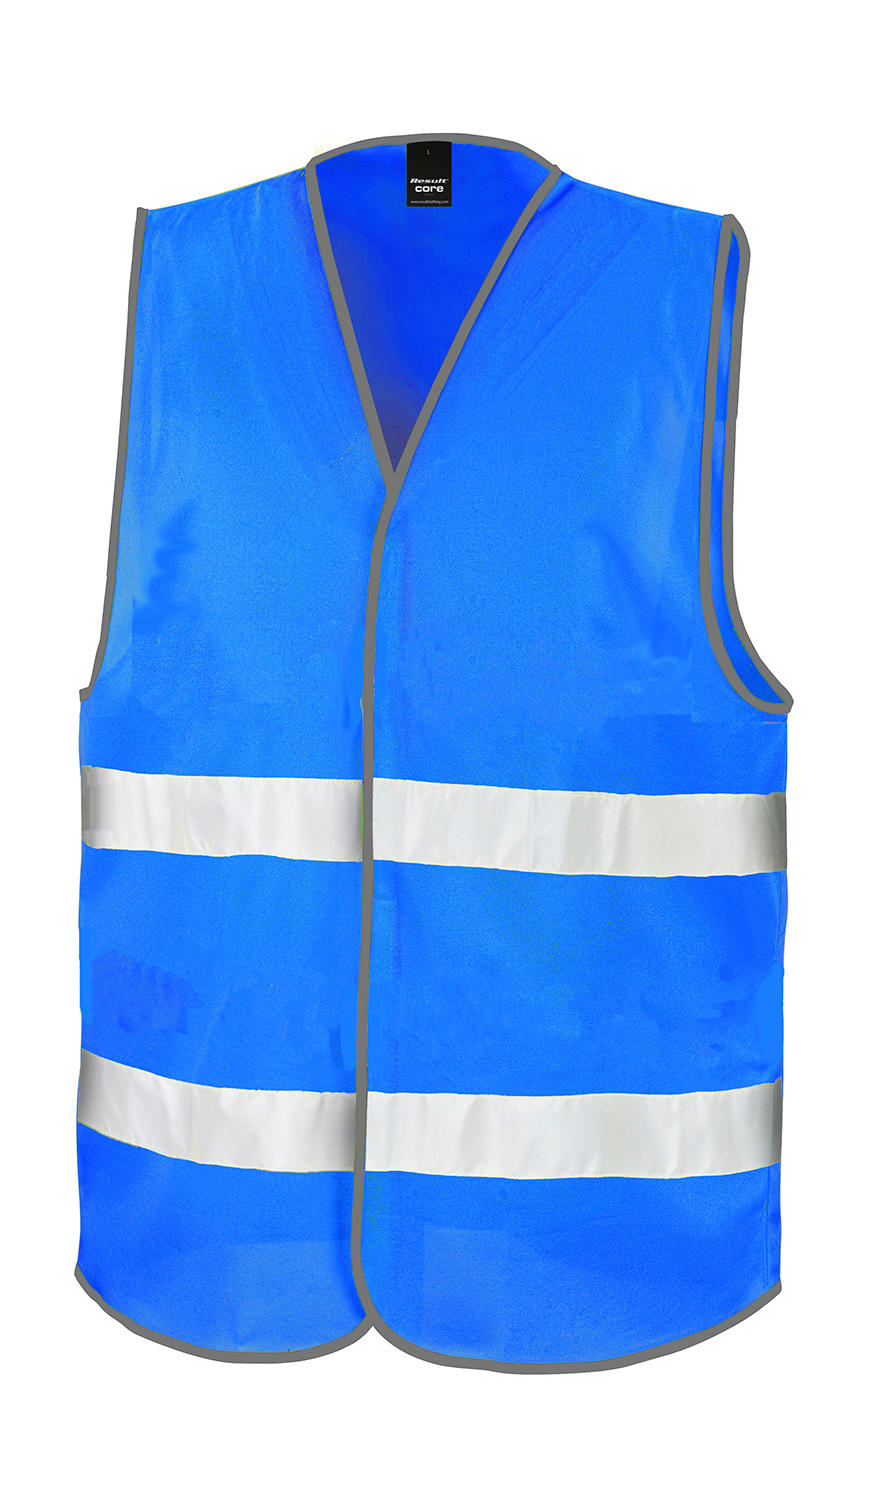  Core Enhanced Visibility Vest in Farbe Royal